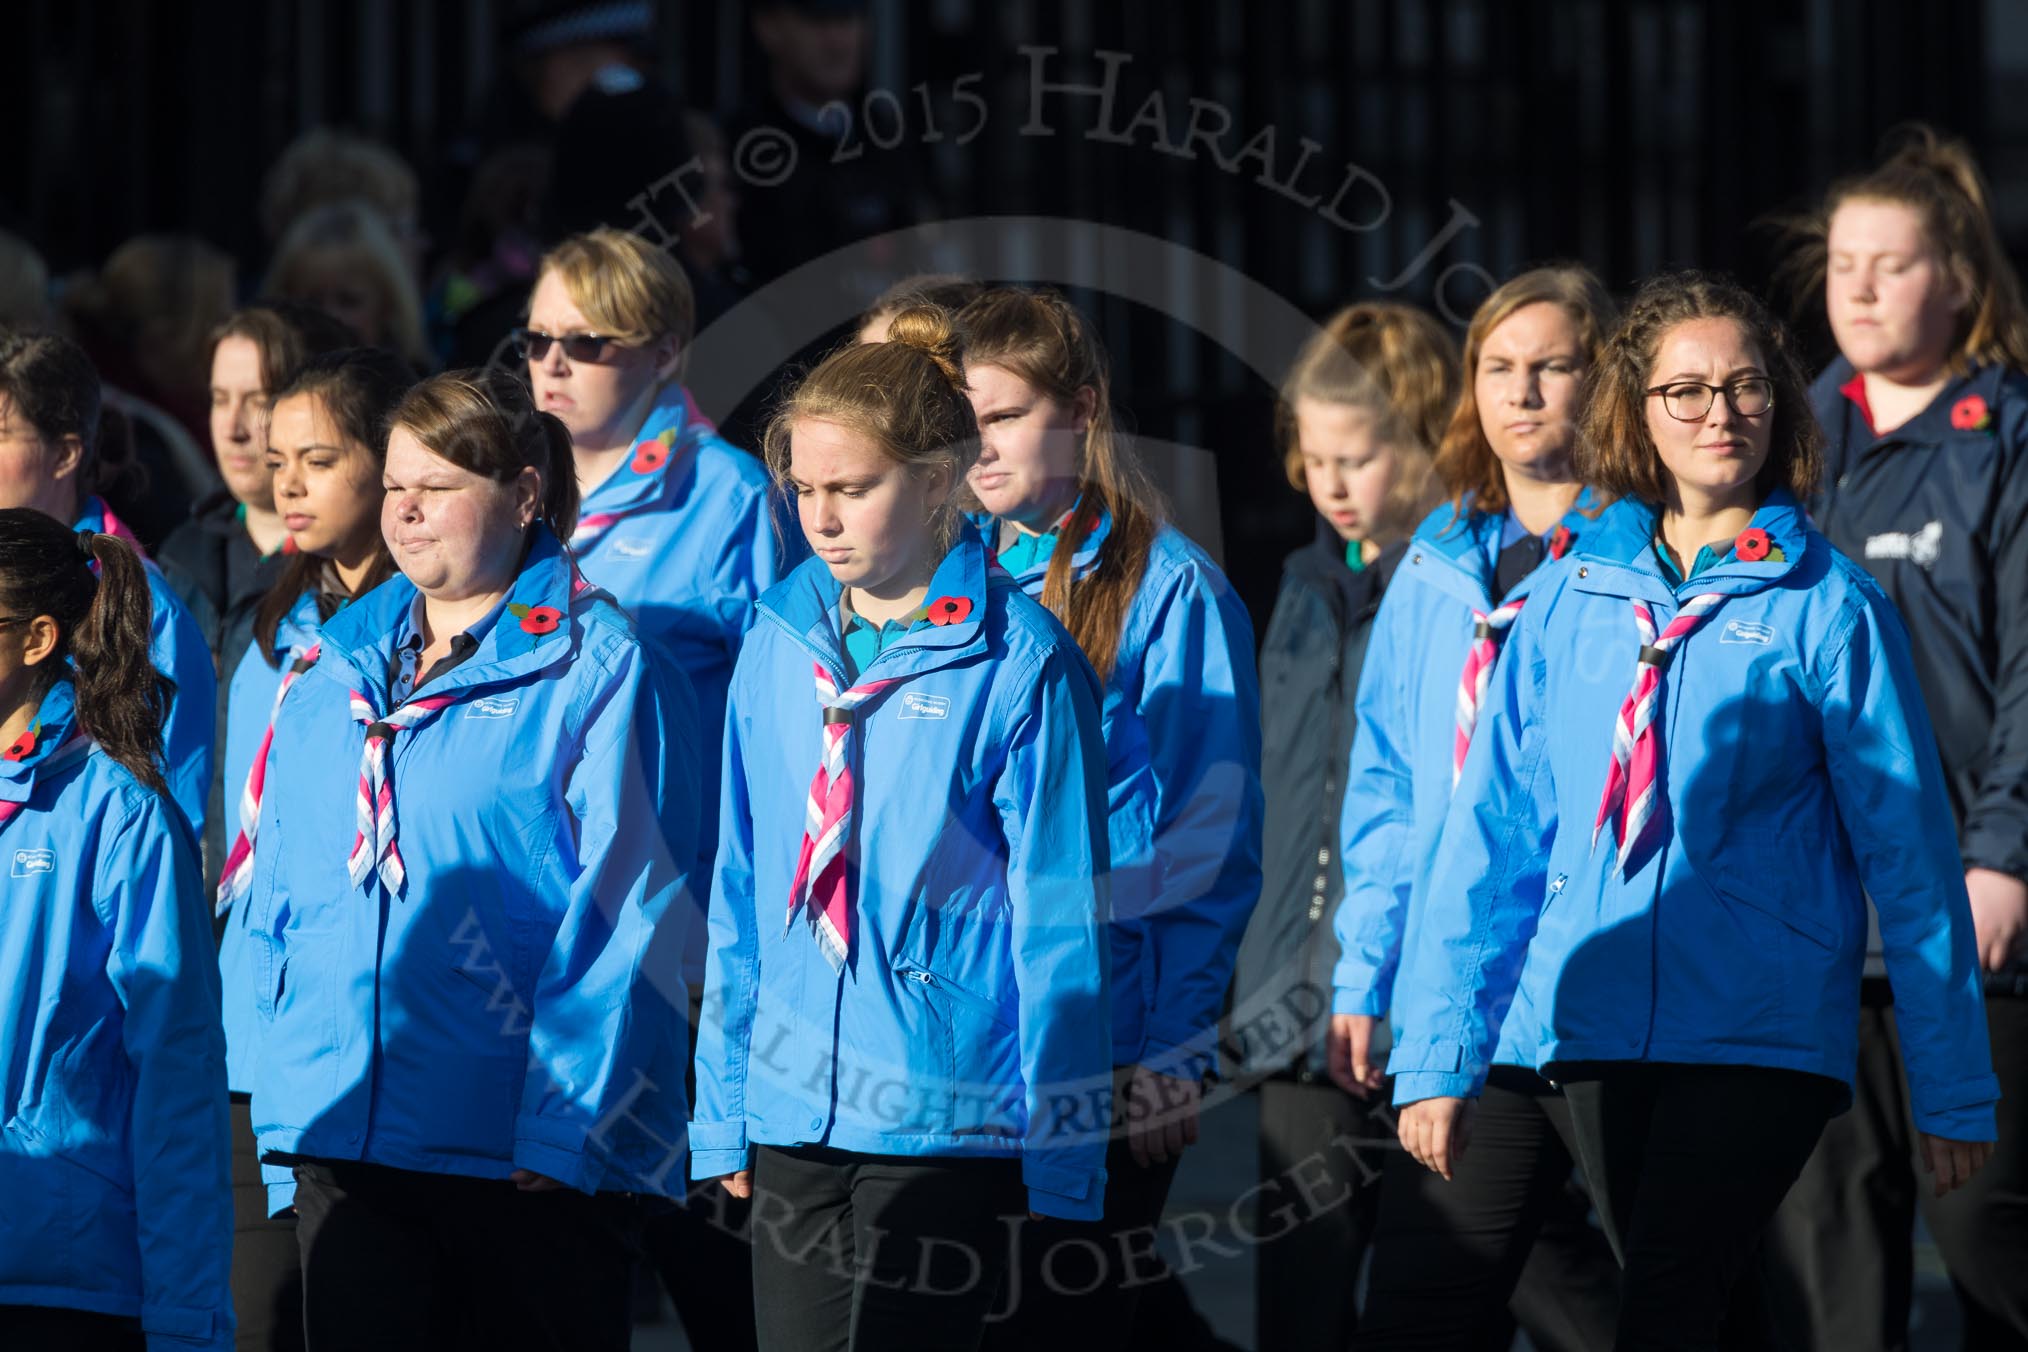 March Past, Remembrance Sunday at the Cenotaph 2016: M34 Girlguiding UK.
Cenotaph, Whitehall, London SW1,
London,
Greater London,
United Kingdom,
on 13 November 2016 at 13:18, image #2860